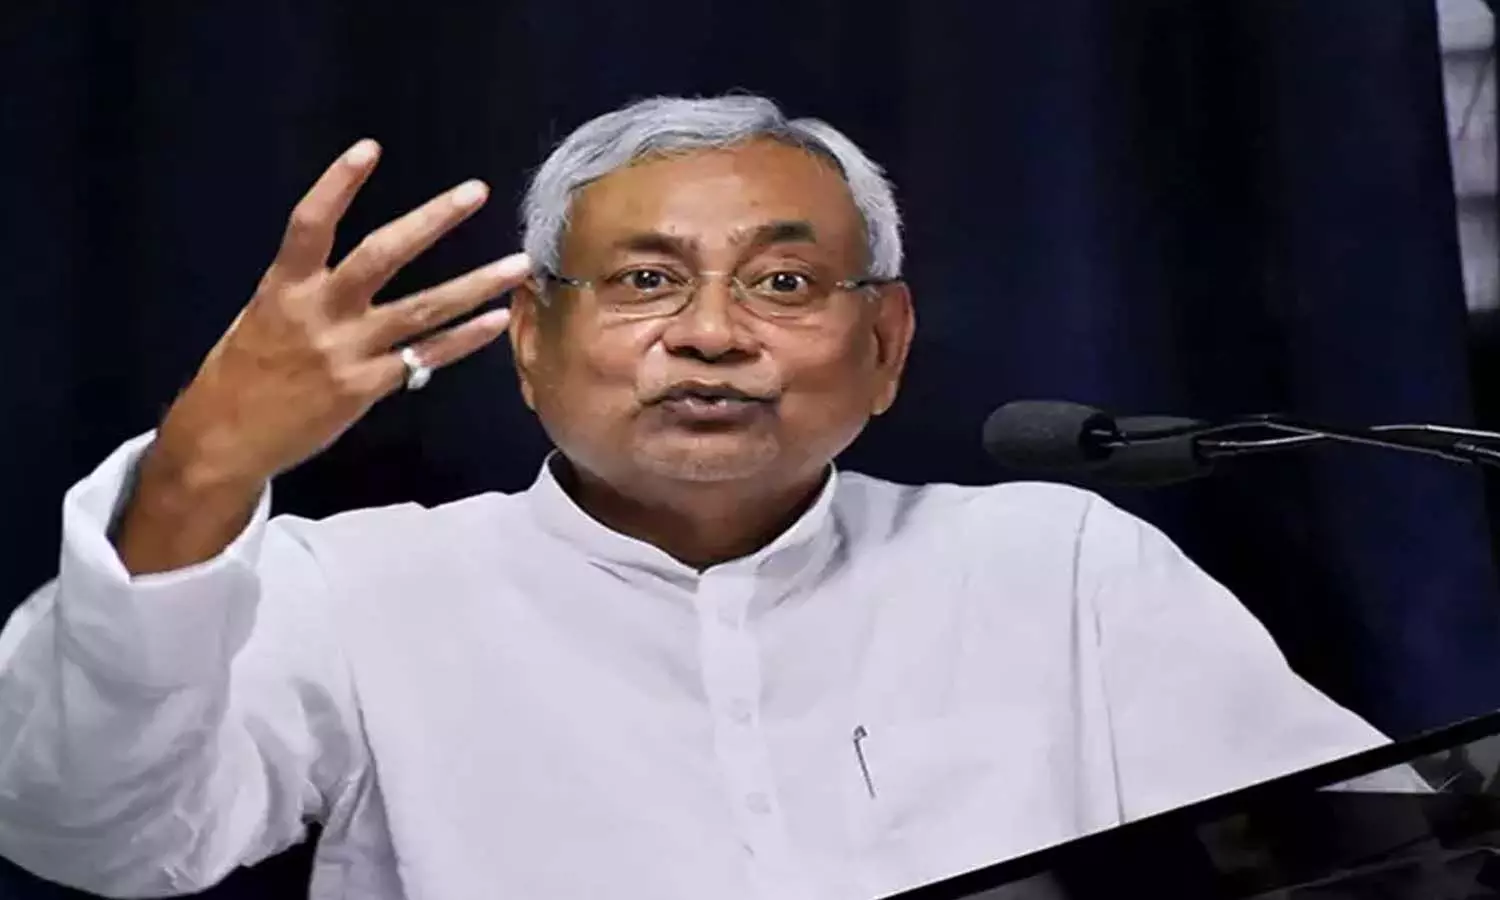 CM Nitishs plan on caste census in Bihar, Muslim castes including Hindus will also be counted